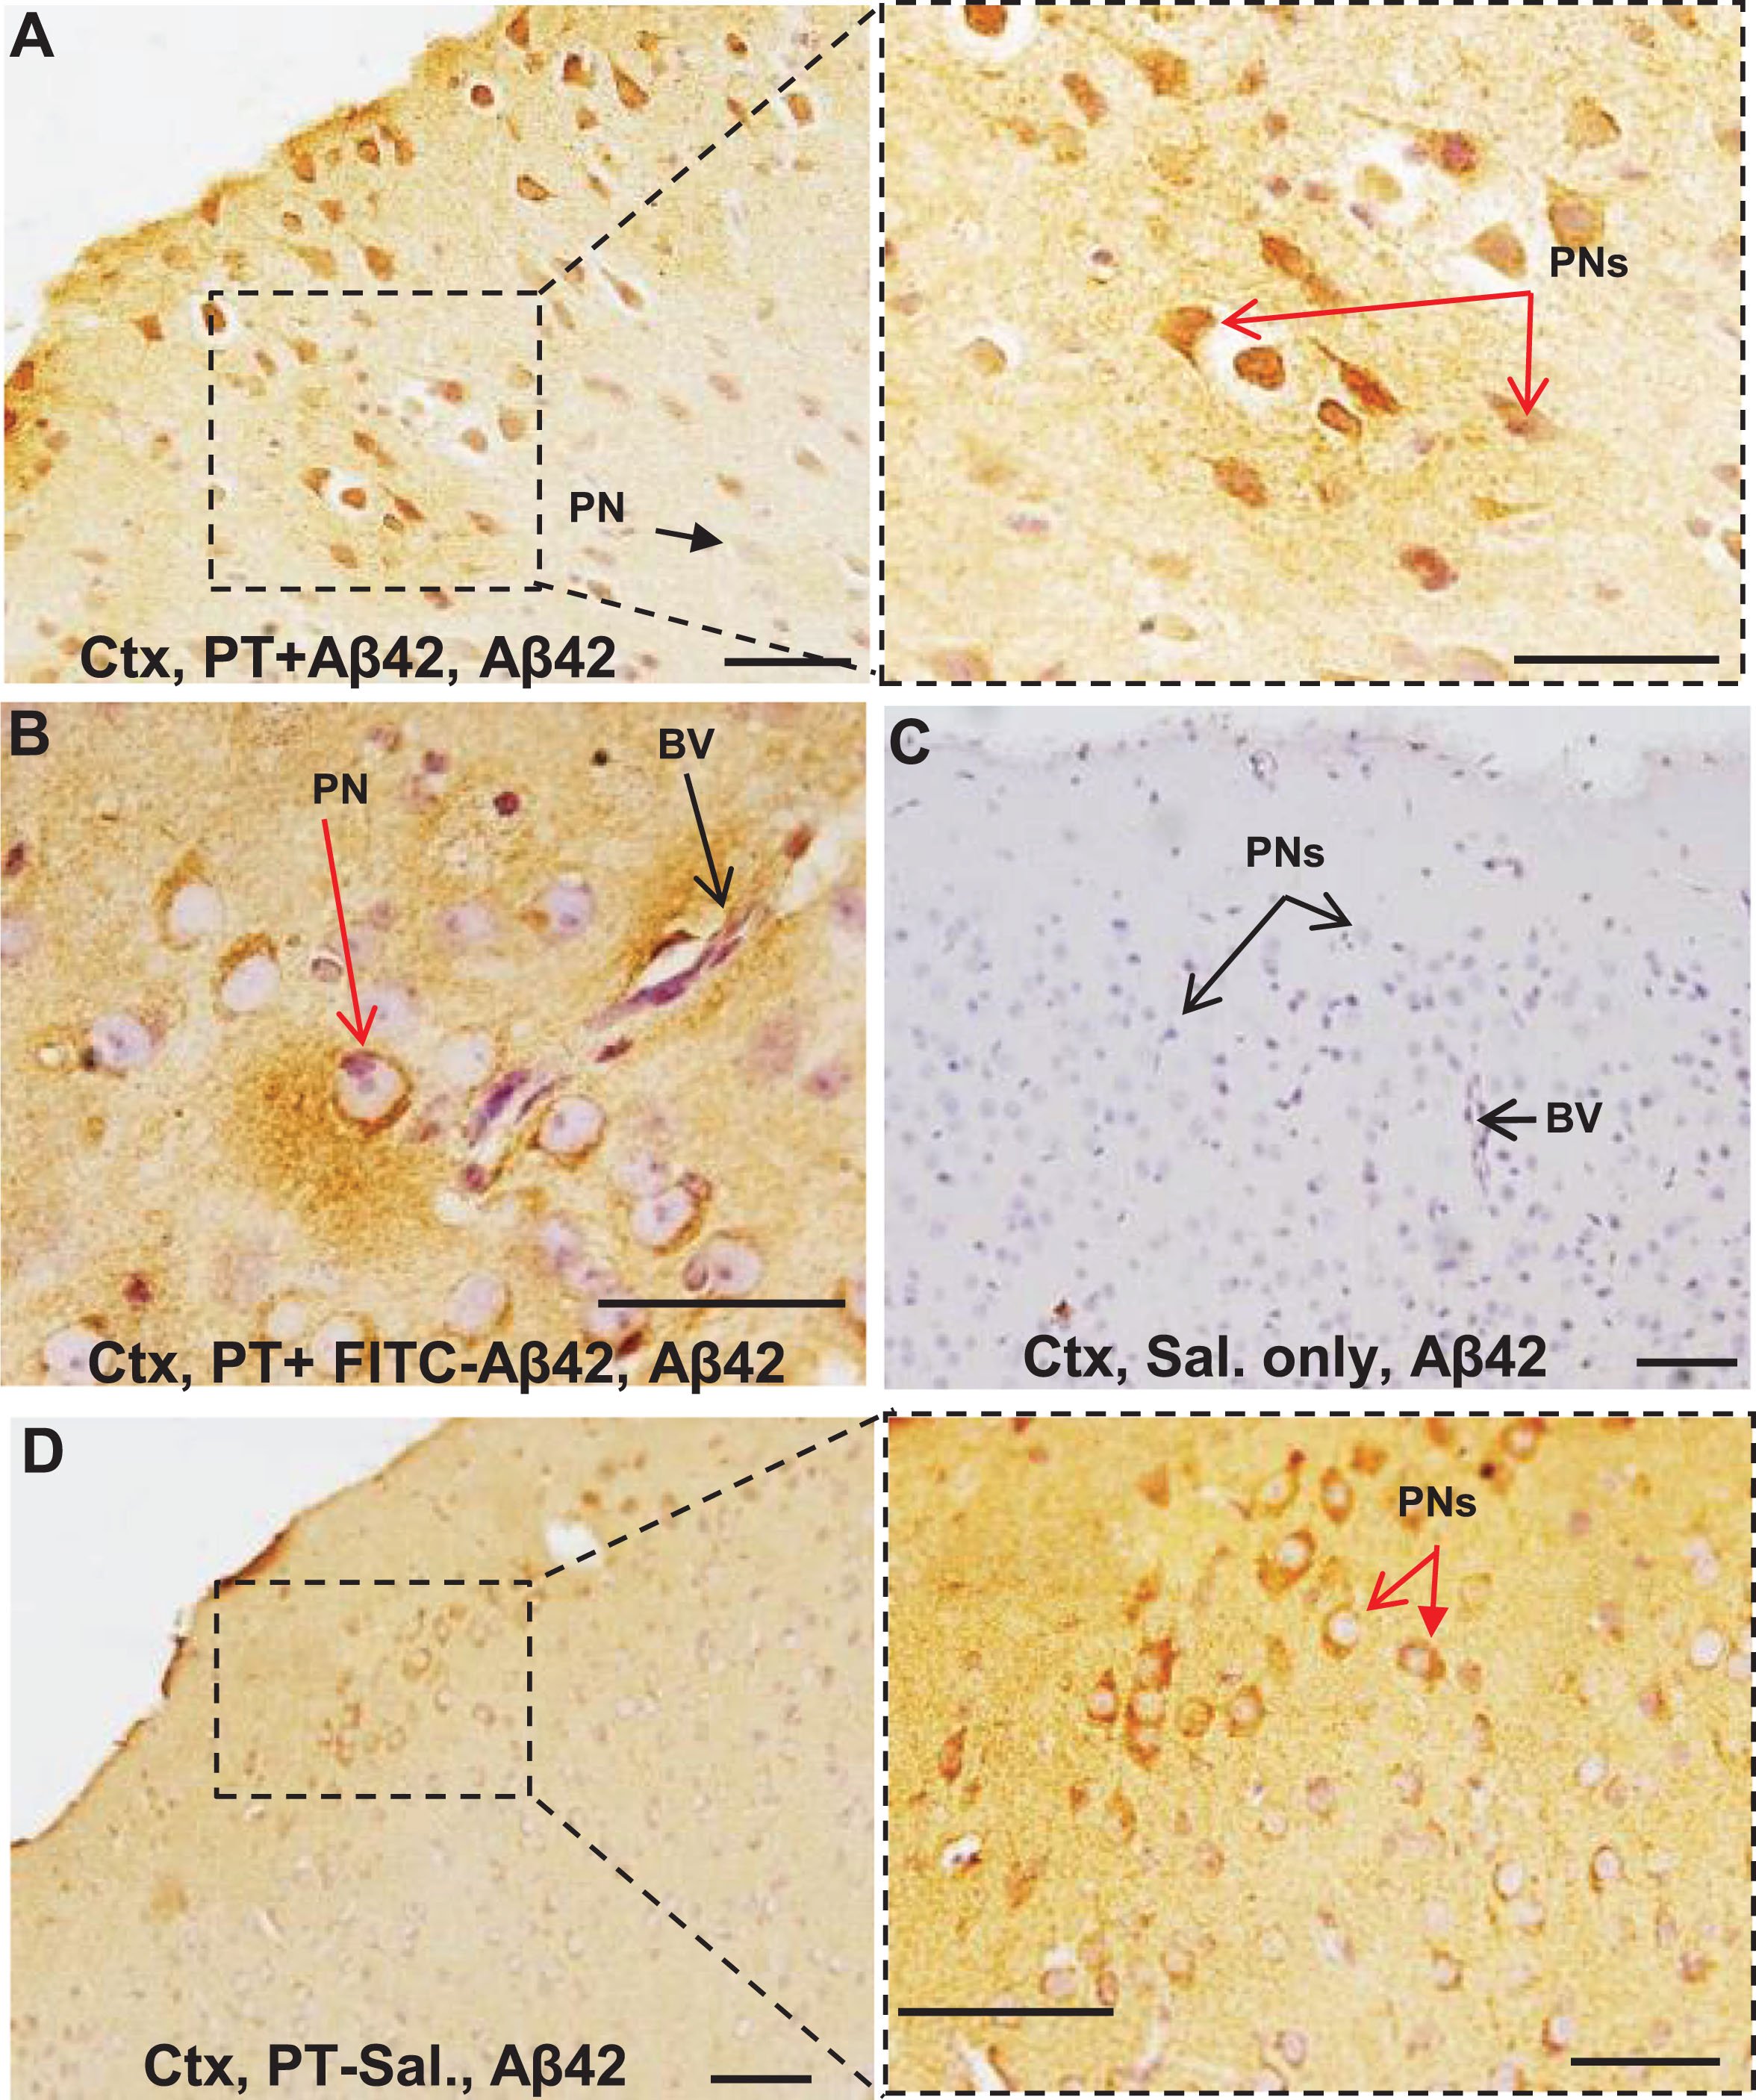 Cortical pyramidal neurons in mice treated with PT + unlabeled A β42 (U-Aβ42) peptide showed an increase in intraneuronal A β42 accumulation comparable to that seen in mice treated with PT+FITC-labeled Aβ42 (FITC-Aβ42) peptide. Bright-field immunohistochemistry with anti-Aβ42 primary antibody was used to compare the fates of injected U-Aβ42 and FITC-Aβ42 in the context of PT-induced chronic BBB breakdown. A, B) Both PT + U-Aβ42- and PT + FITC-Aβ42-treated mice demonstrated increased neuronal accumulation of Aβ42 in the cerebral cortex (Ctx), red arrows. C) No evidence of neuronal Aβ42 deposition was observed in Sal-only mice. D) Mice in the PT-Sal group also demonstrated some intraneuronal Aβ42, but this was much less extensive and was often largely confined to small, isolated groups of neurons. This suggests that soluble, endogenous mouse Aβ42 is also able to enter the brain parenchyma through a defective BBB. It is important to point out that, using the bright field microscopy, we are unable to differentiate between endogenous Aβ42 peptides from the FITC-Aβ42 peptide. PN, pyramidal neuron; BV, blood vessel; Cap, capillary; PT, Pertussis toxin; Sal, saline. Scale bar = 50μm.